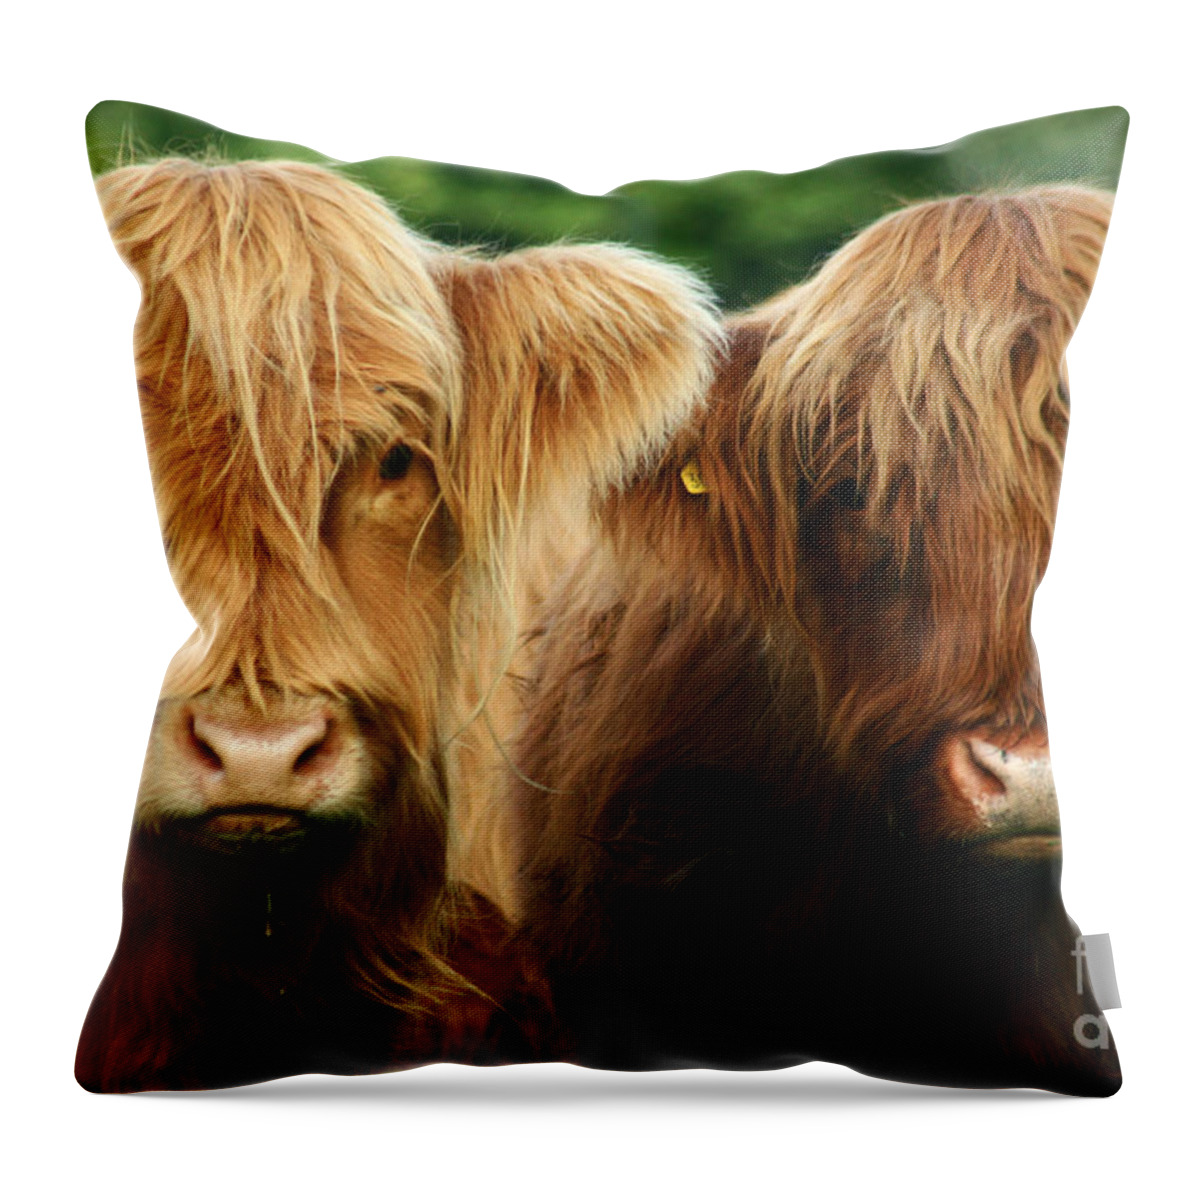 Cow Throw Pillow featuring the photograph Yeti Cows by Ang El